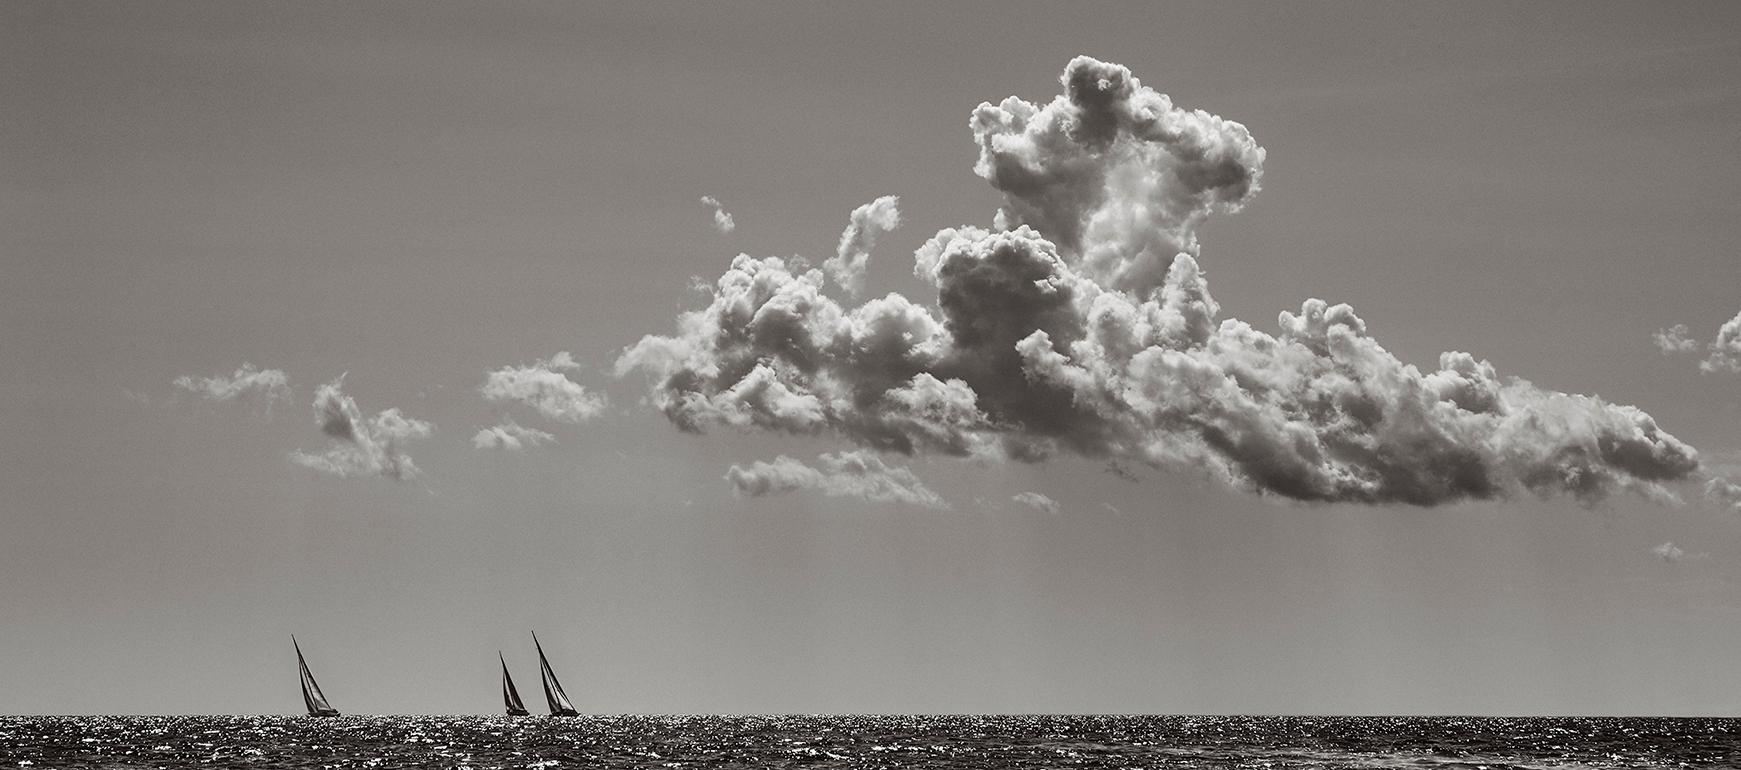 Drew Doggett Black and White Photograph - Iconic Racing Yachts in an Abstract Composition on the Still Seas